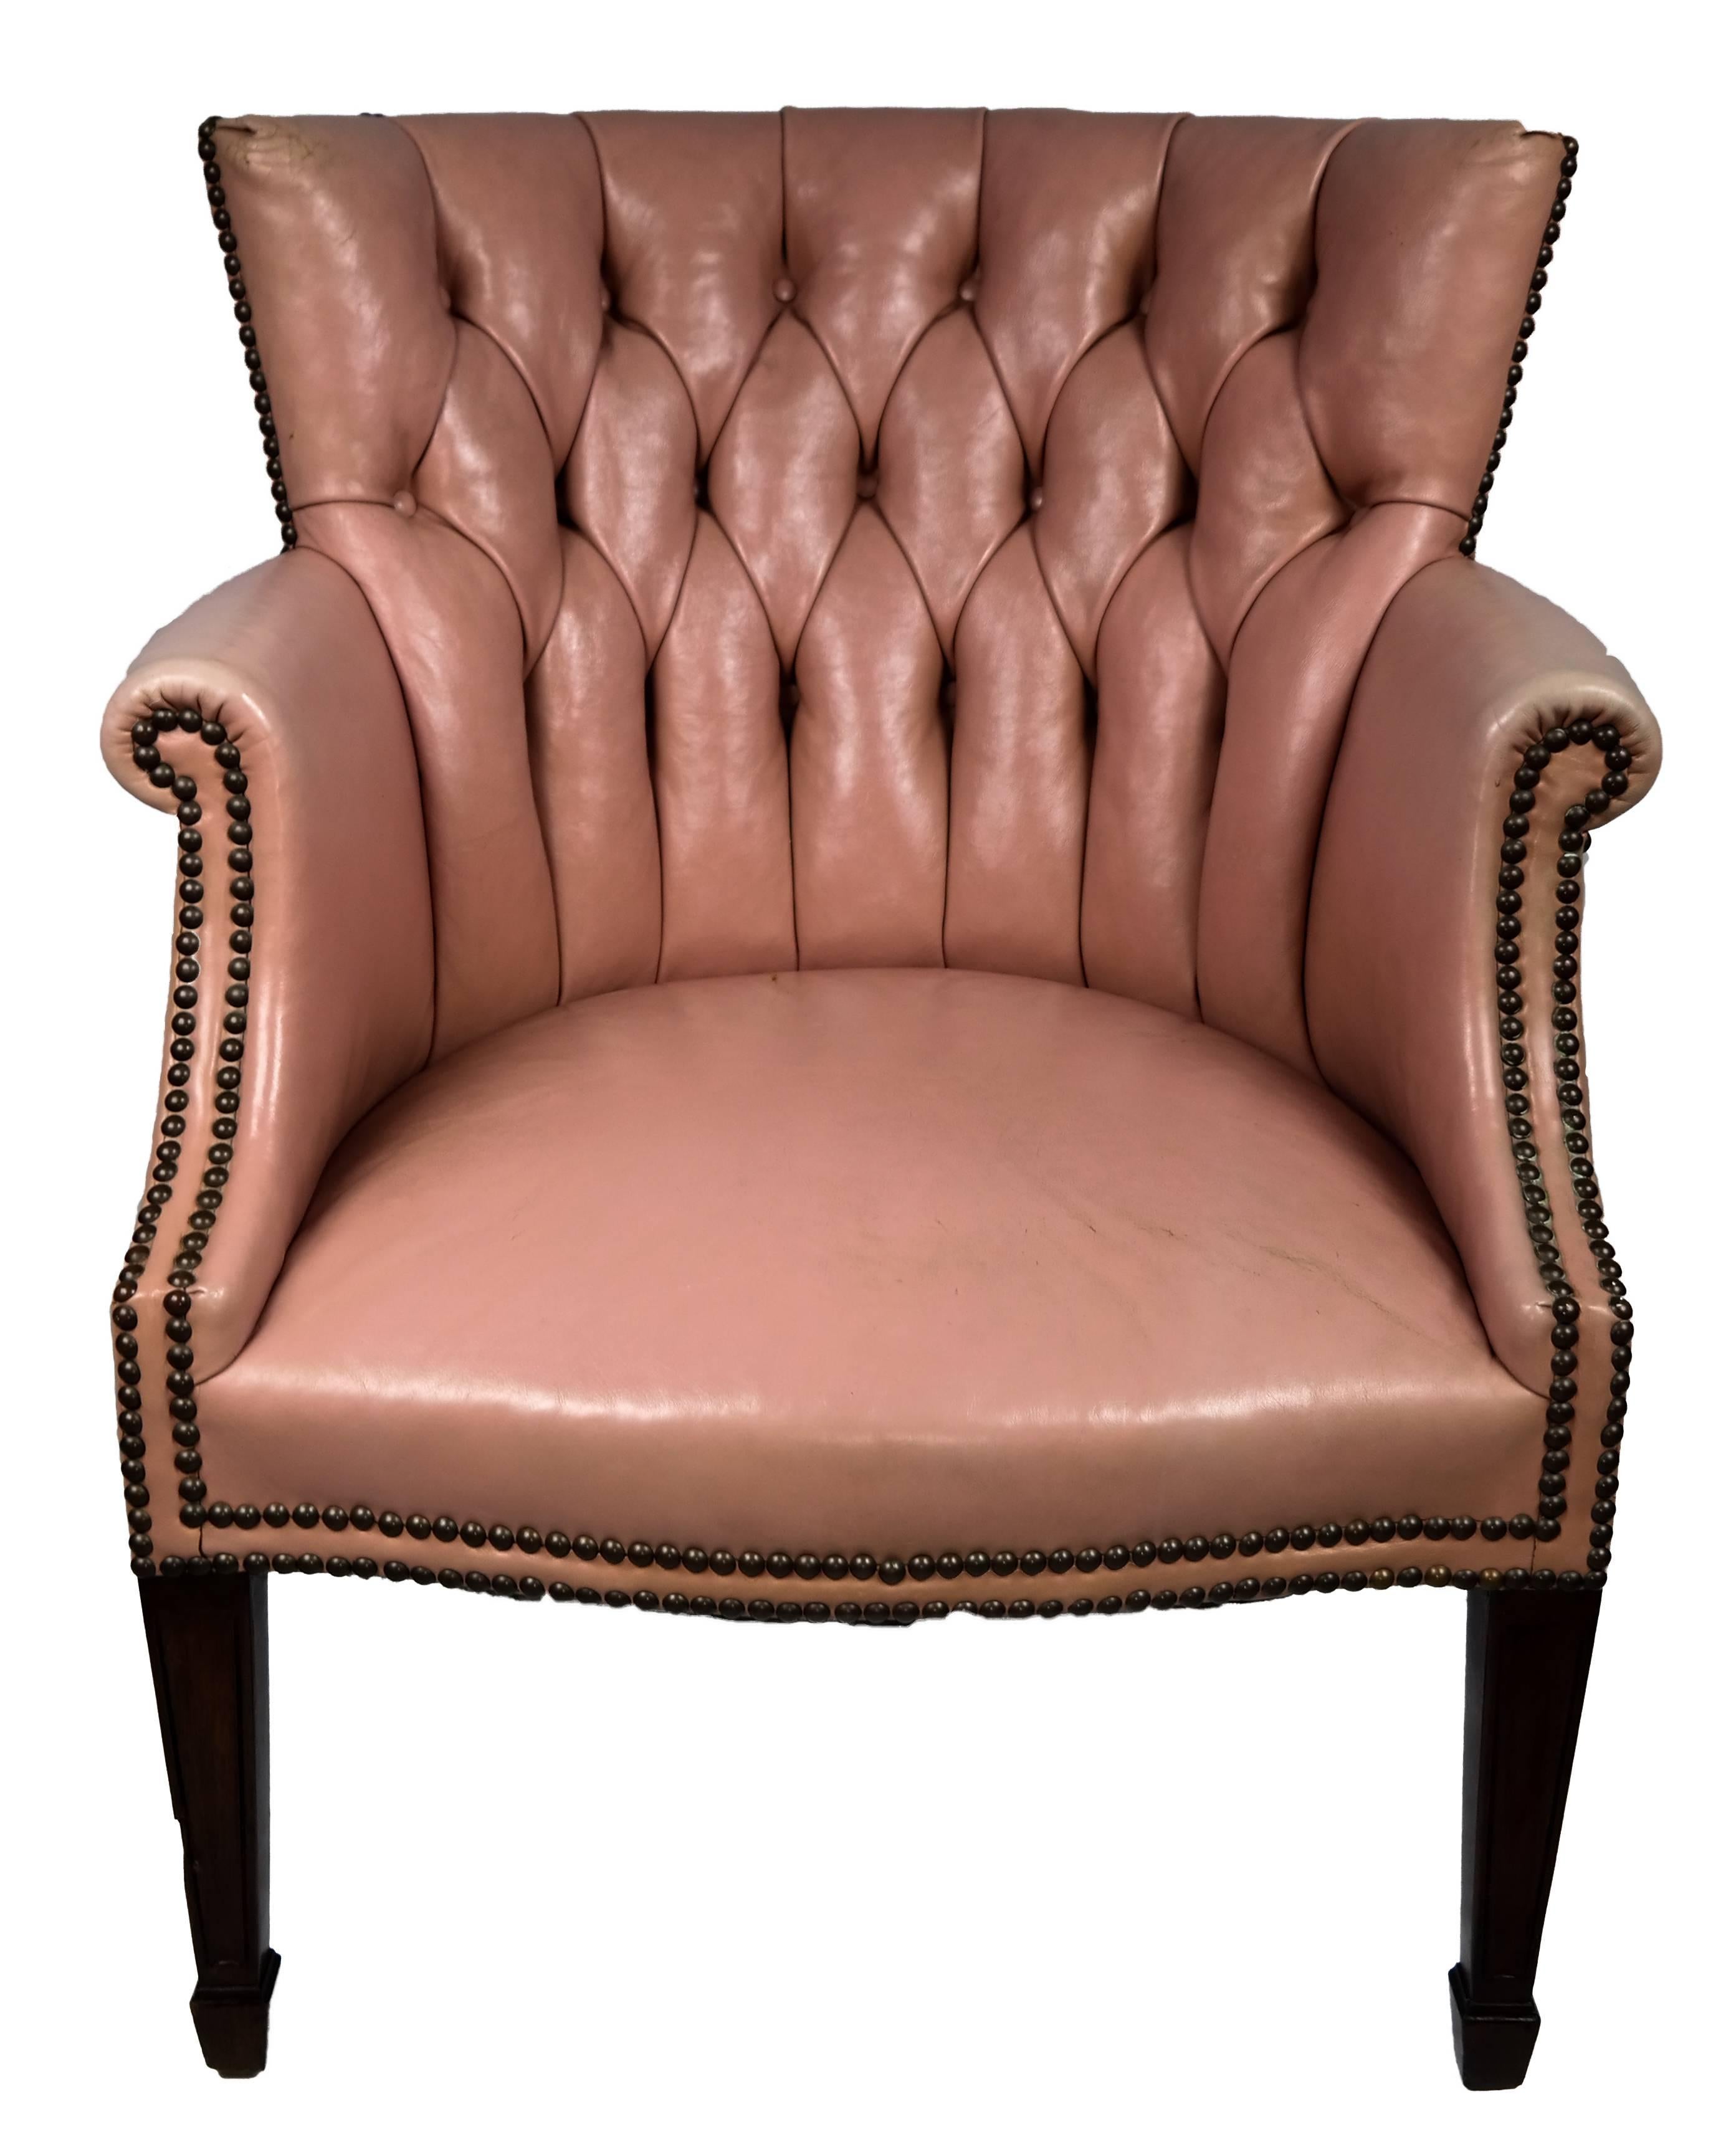 Midcentury pink leather, tufted back arm chair, ca 1960s, American